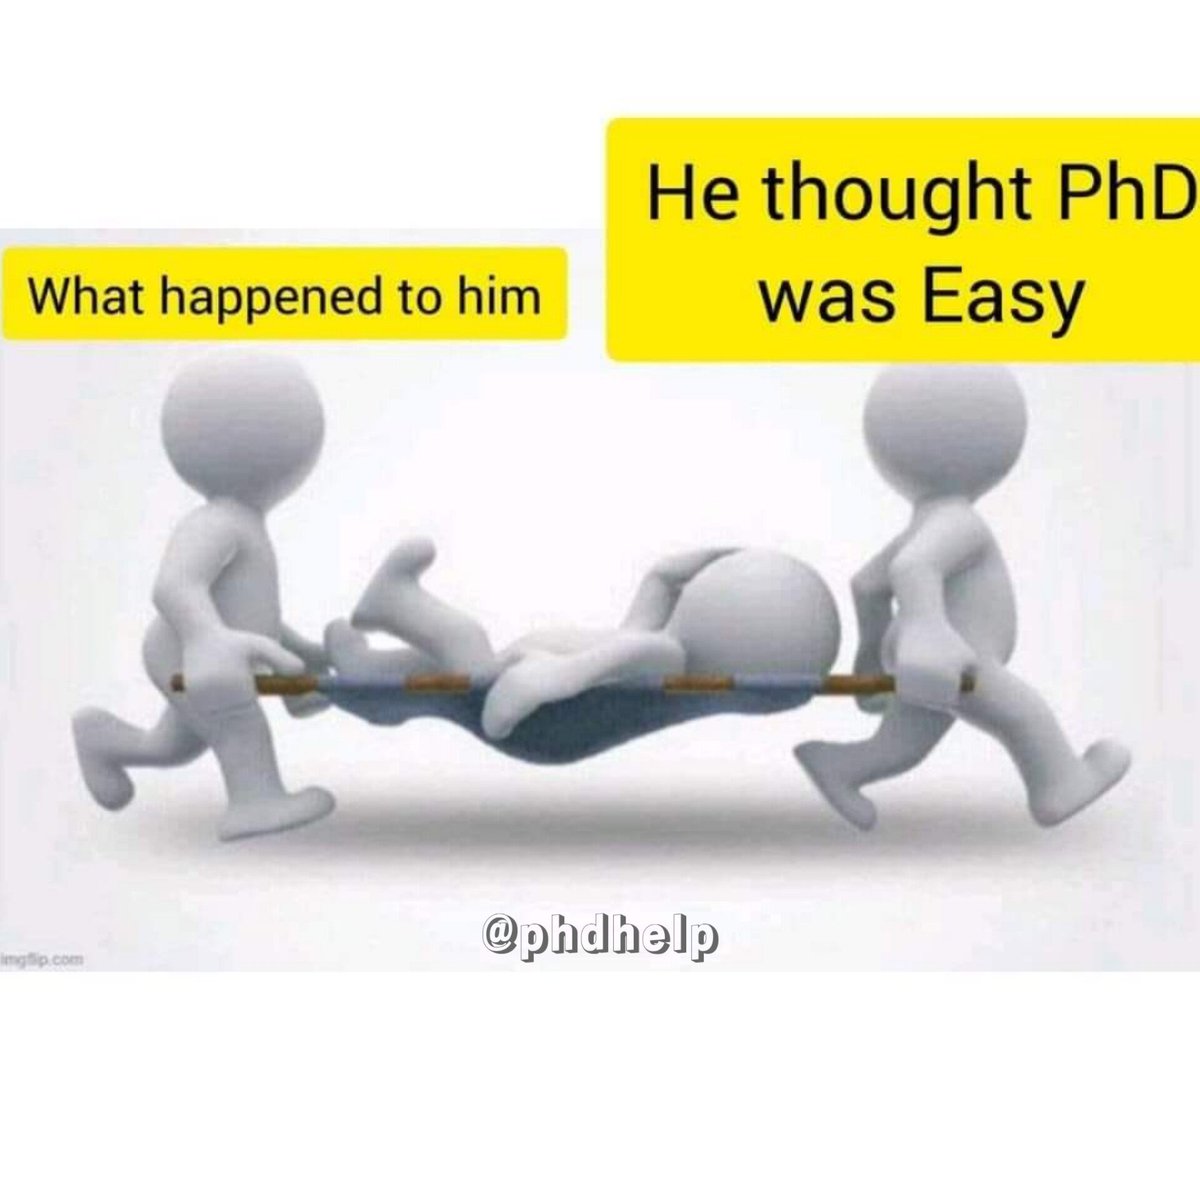 What think about PhD??
#PhD #phdmemes #research #academia #AcademicTwitter